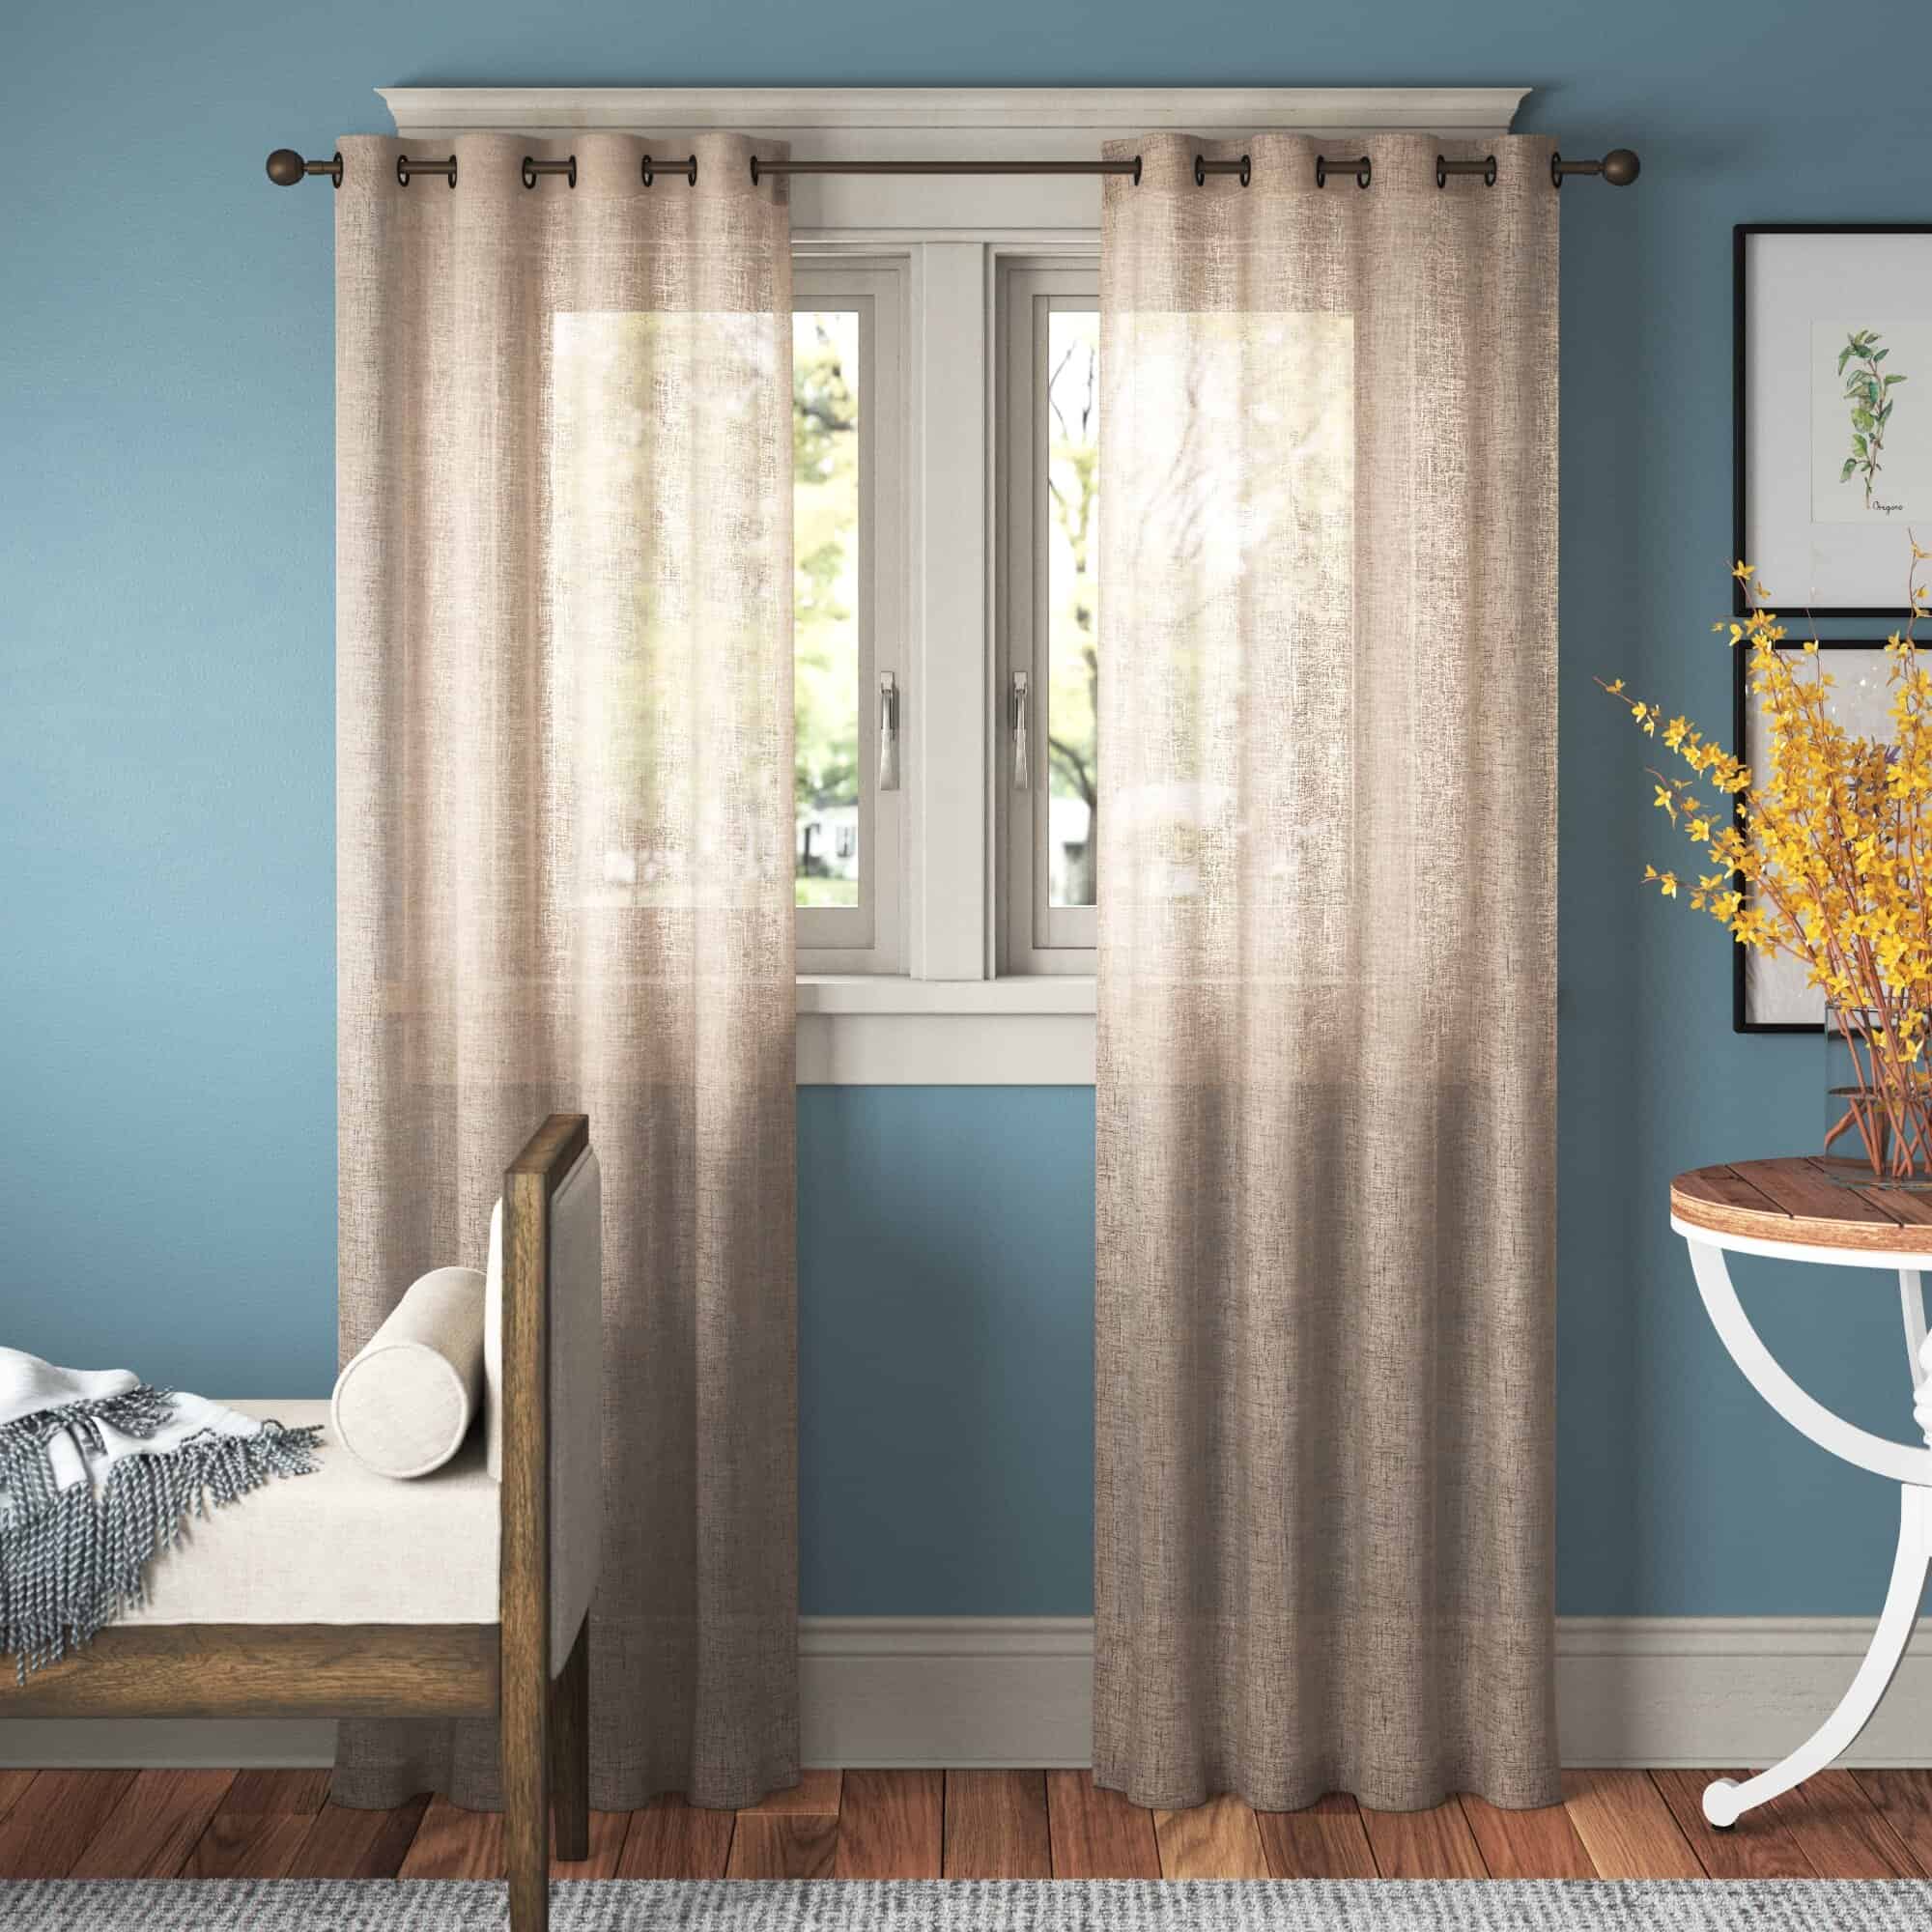 Beige Curtains Are Another Great Neutral Against Blue Walls